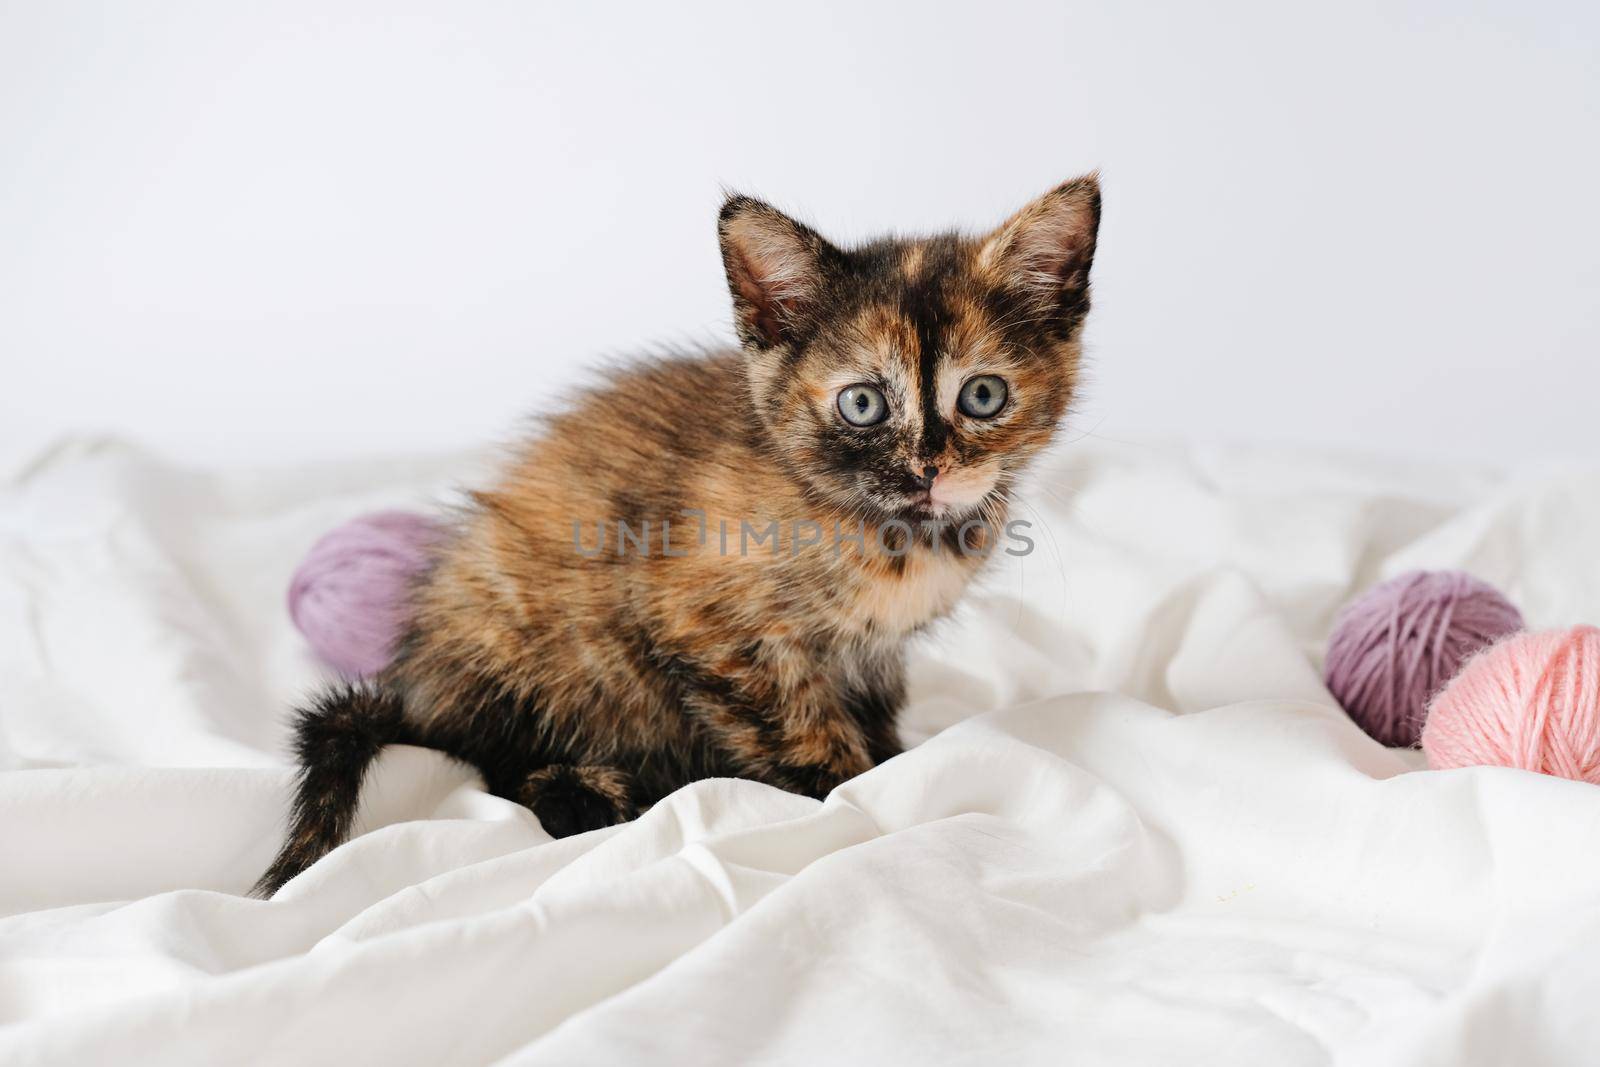 Little curious red striped kitten sitting over white blanket looking at camera with balls skeins of thread.